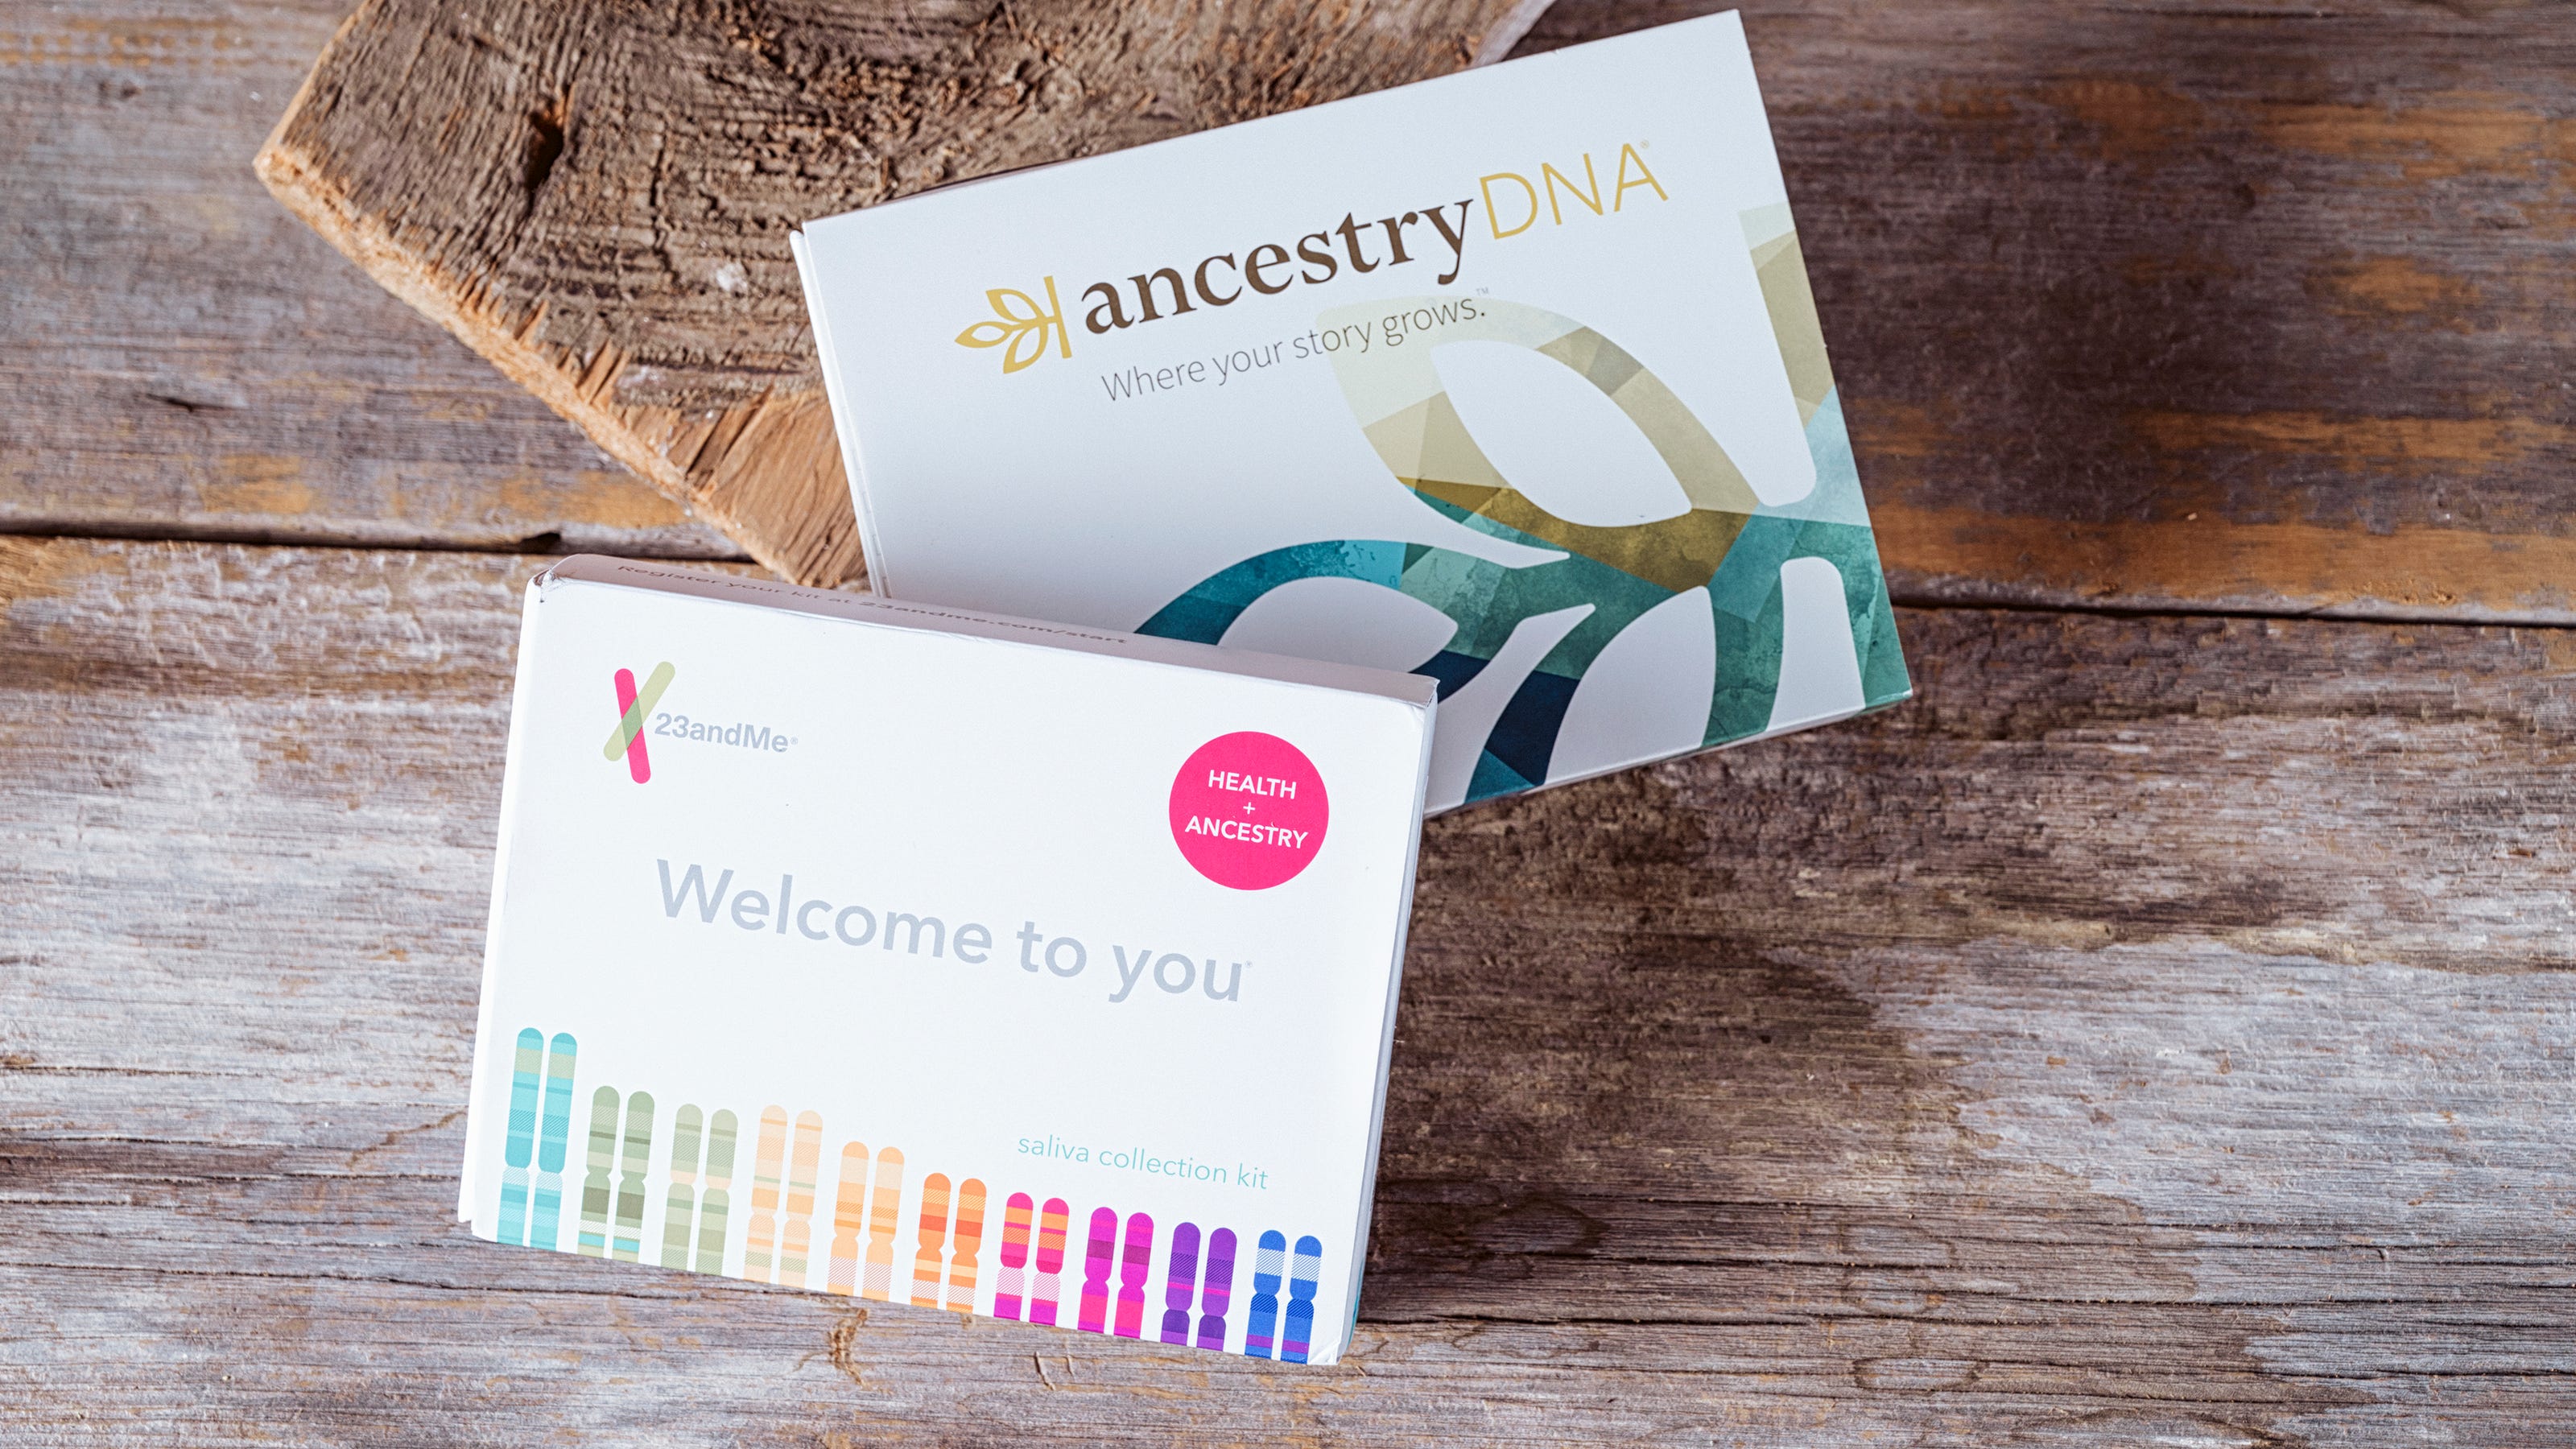 Armed with massive data pools, genealogy companies Ancestry, 23andMe begin COVID-19 research - USA TODAY